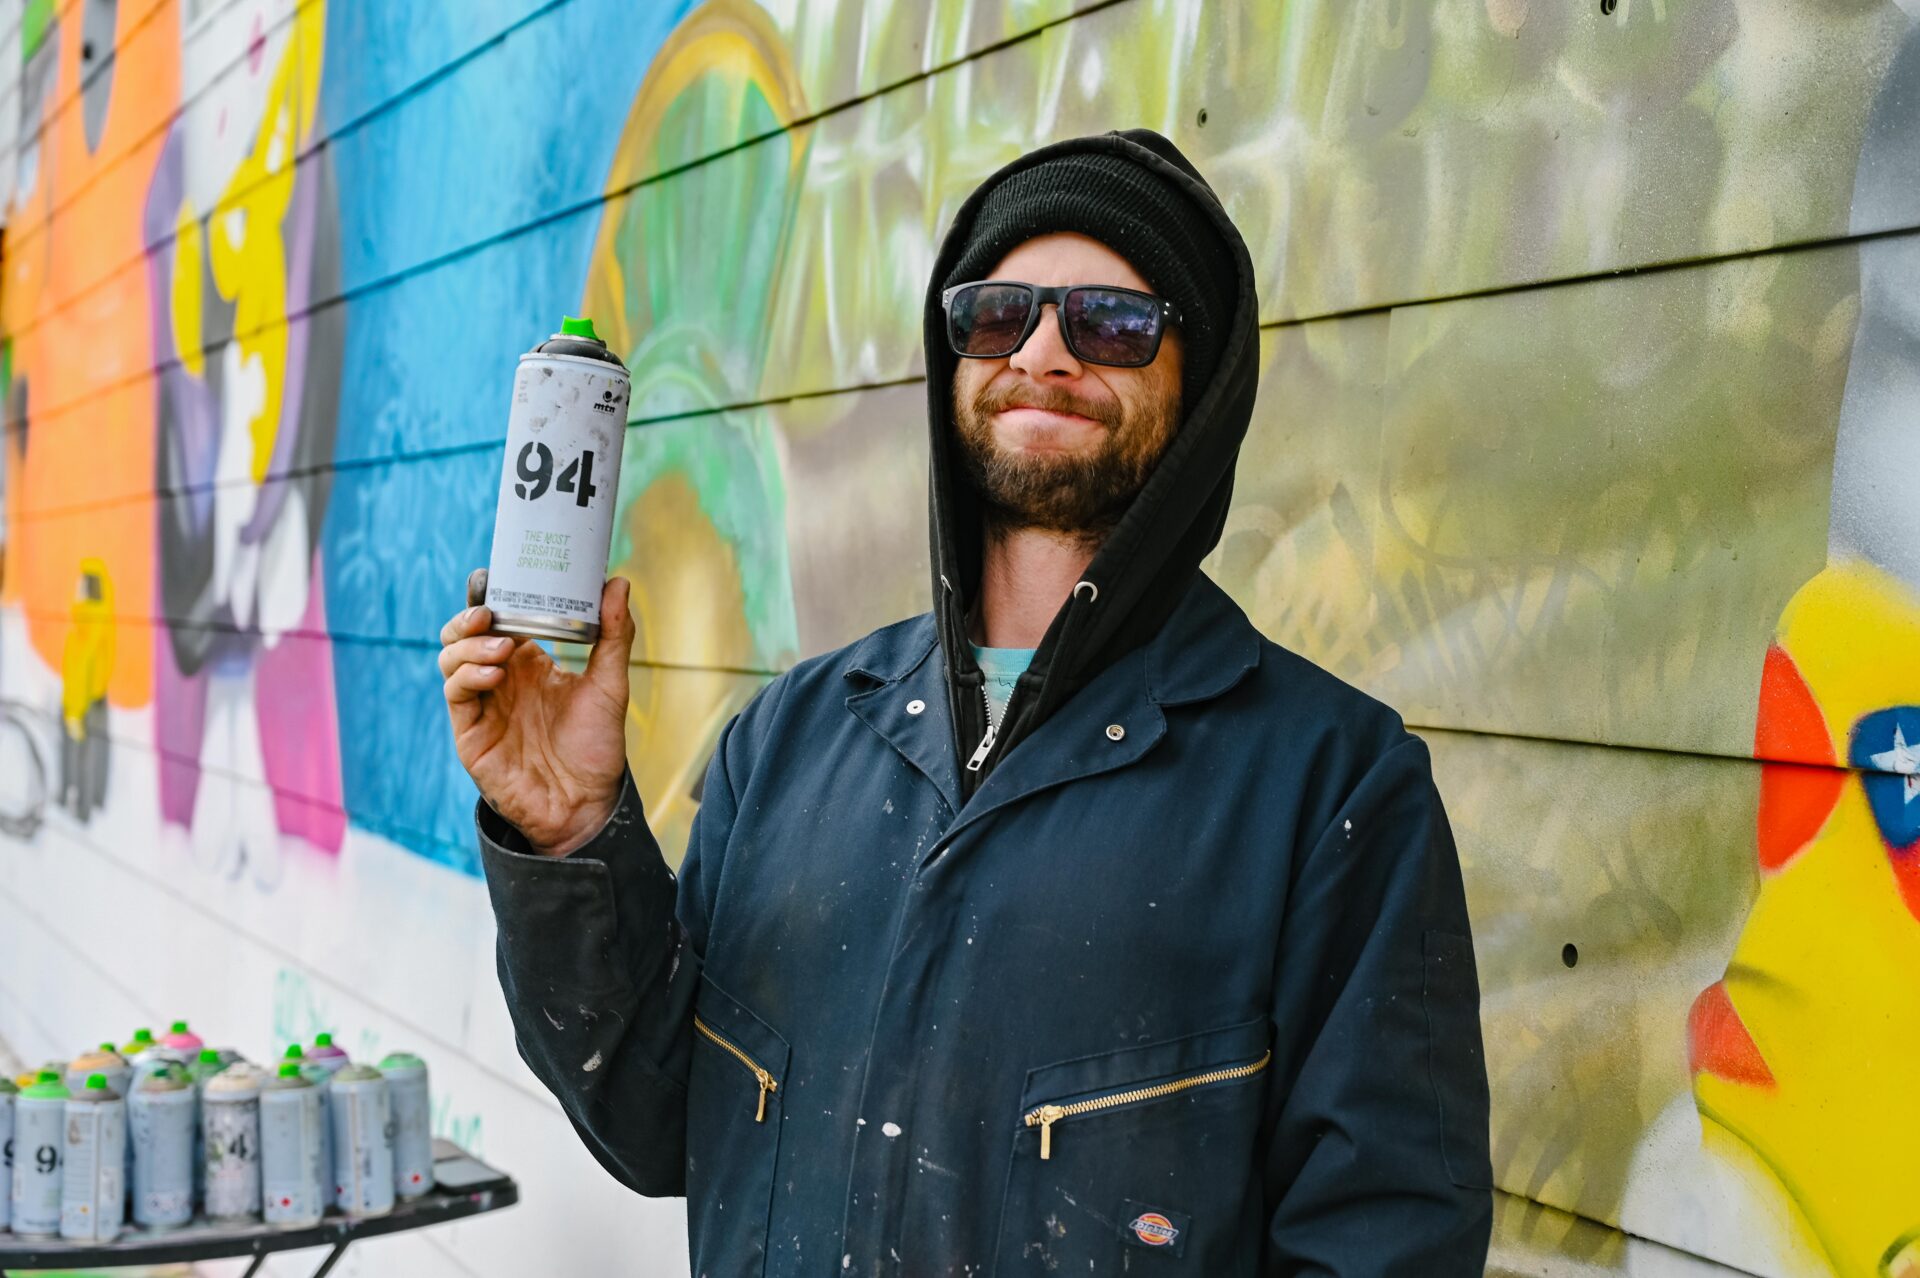 Artist Aaron - AG_PNT, holds a can of spray paint, in front of his large mural that is in progress